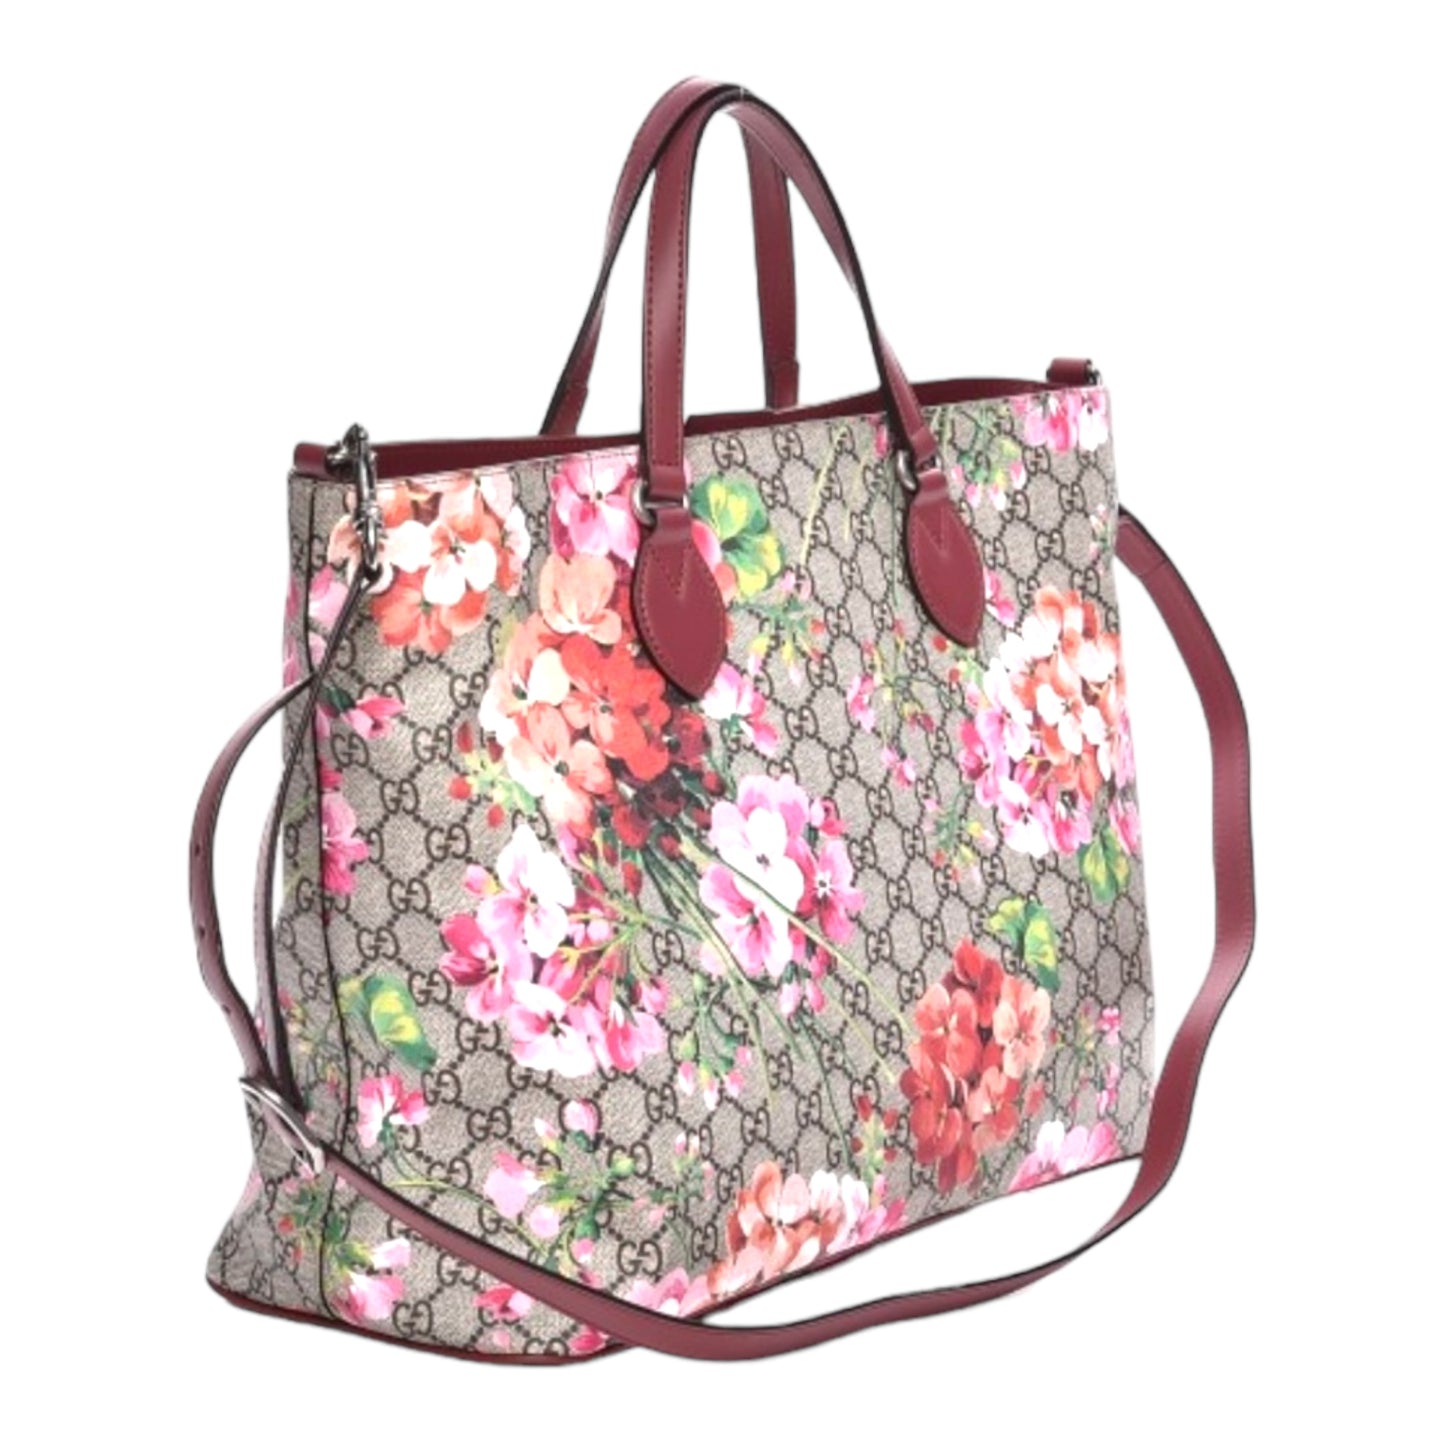 GG Supreme Blooms Tote New with tags